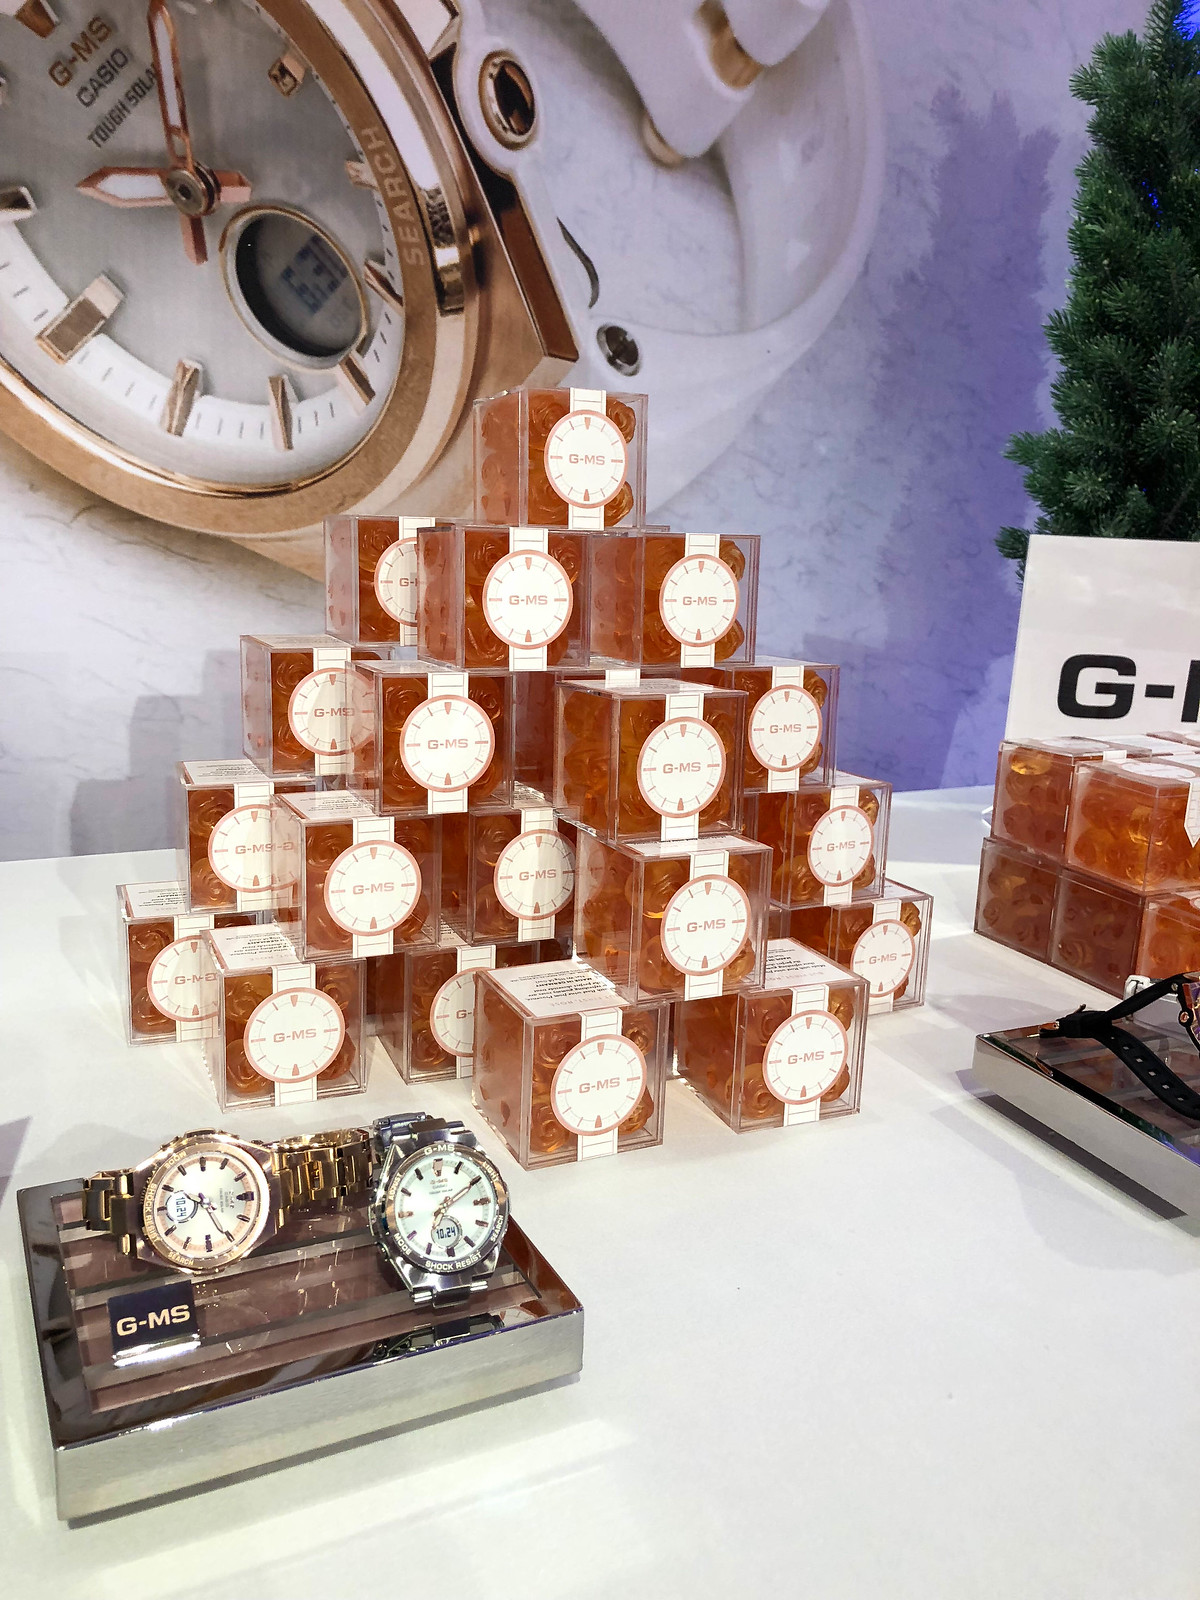 It's "Time" to Upgrade Your Fall Wardrobe with G-SHOCK G-MS line